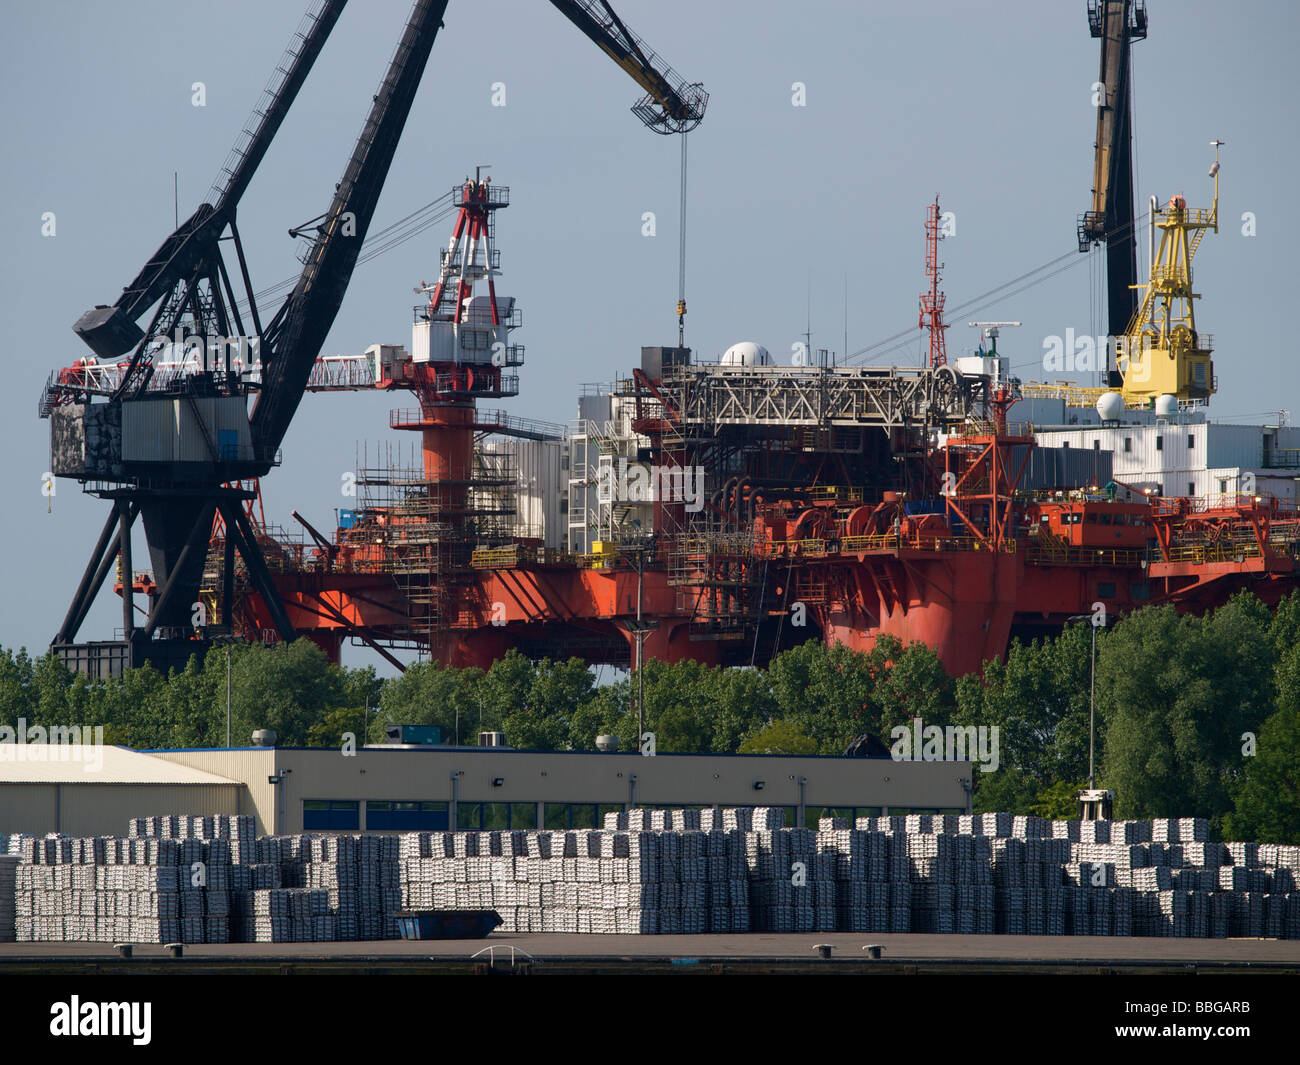 Oil production platform being renovated in the port of Rotterdam with large quantity of aluminium in front Stock Photo